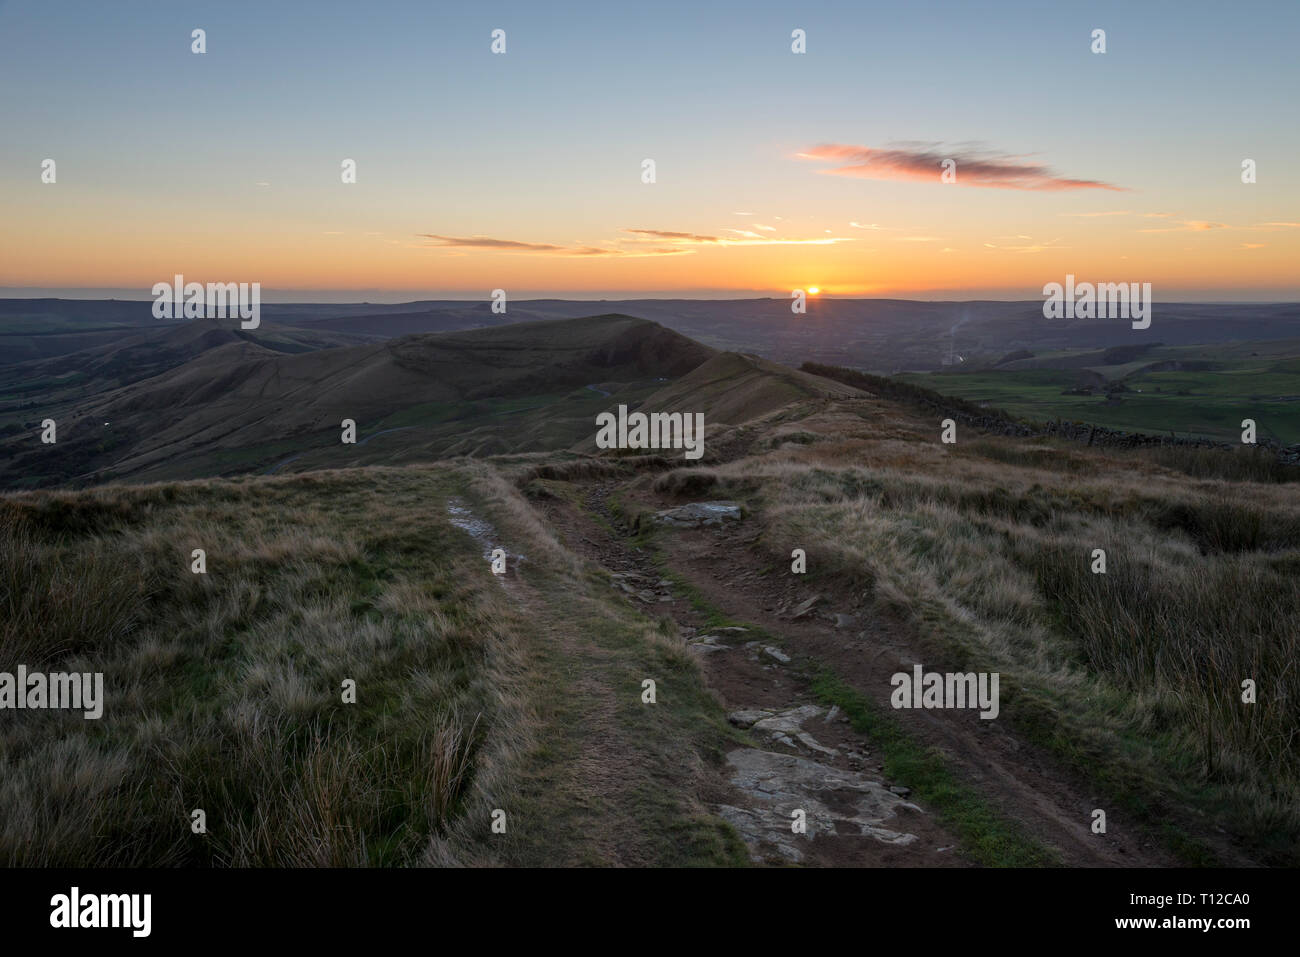 Sunrise on Rushup Edge in the Peak District national park, Derbyshire, England. Stock Photo